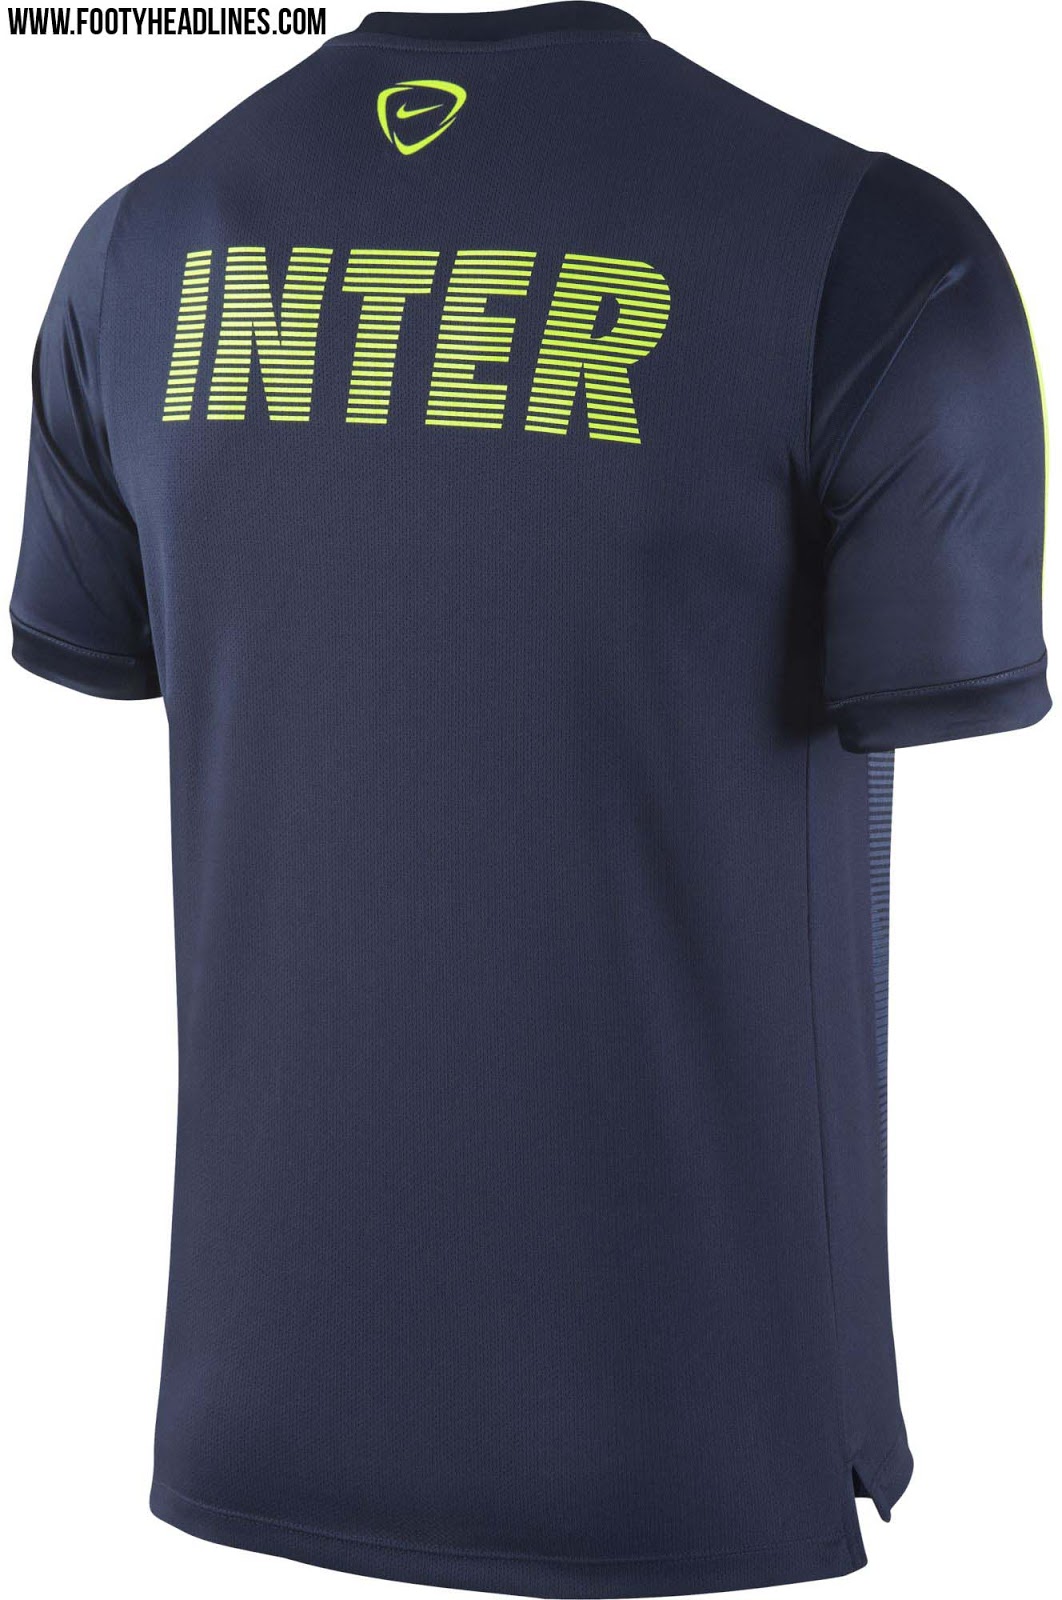 Nike Inter Milan 2015 Pre-Match and Training Shirts Released - Footy ...